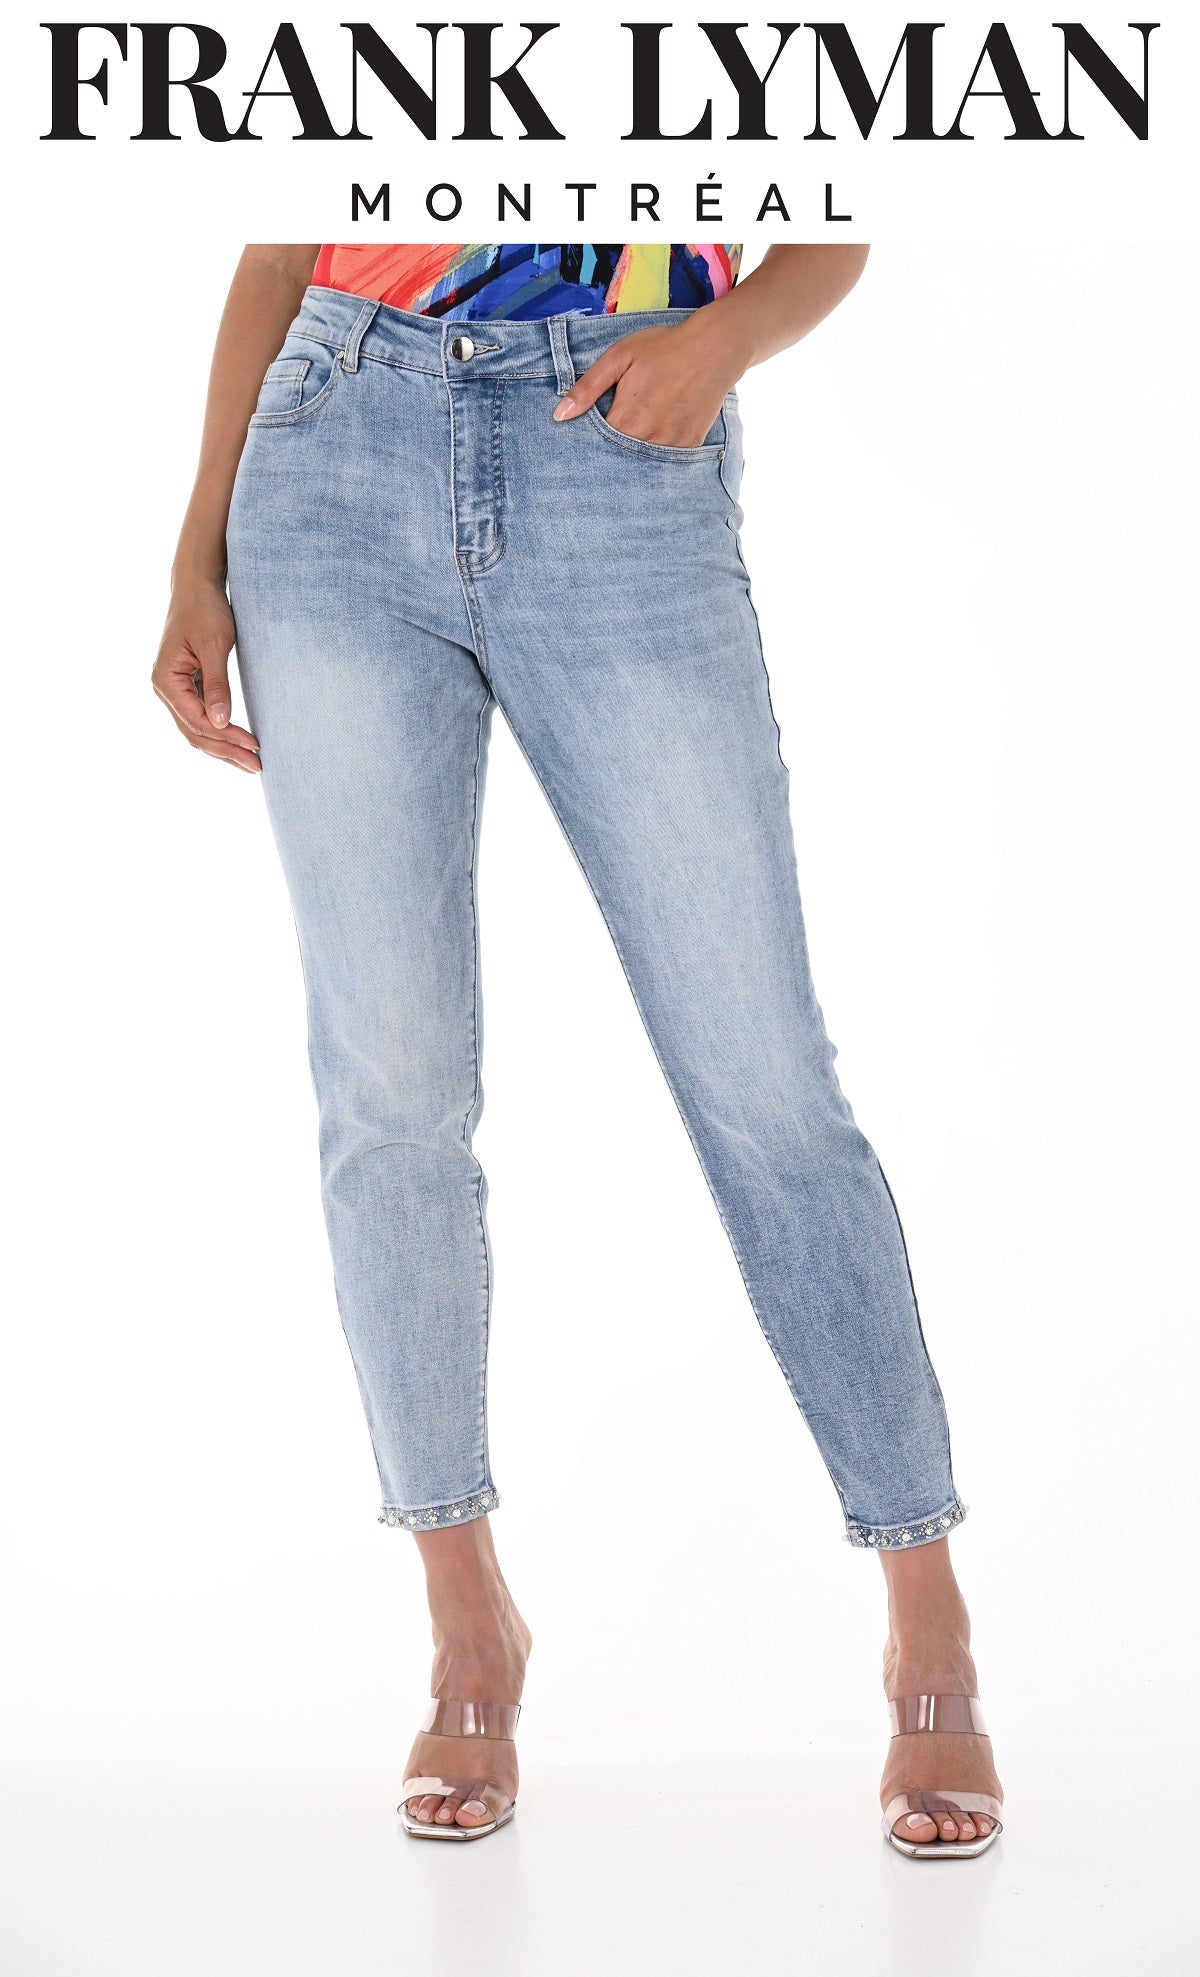 Frank Lyman Montreal Pearl Bow Jeans-Frank Lyman Montreal Denim Blue With Back Pearl Bow Detail-Denim Blue Pearl Jeans